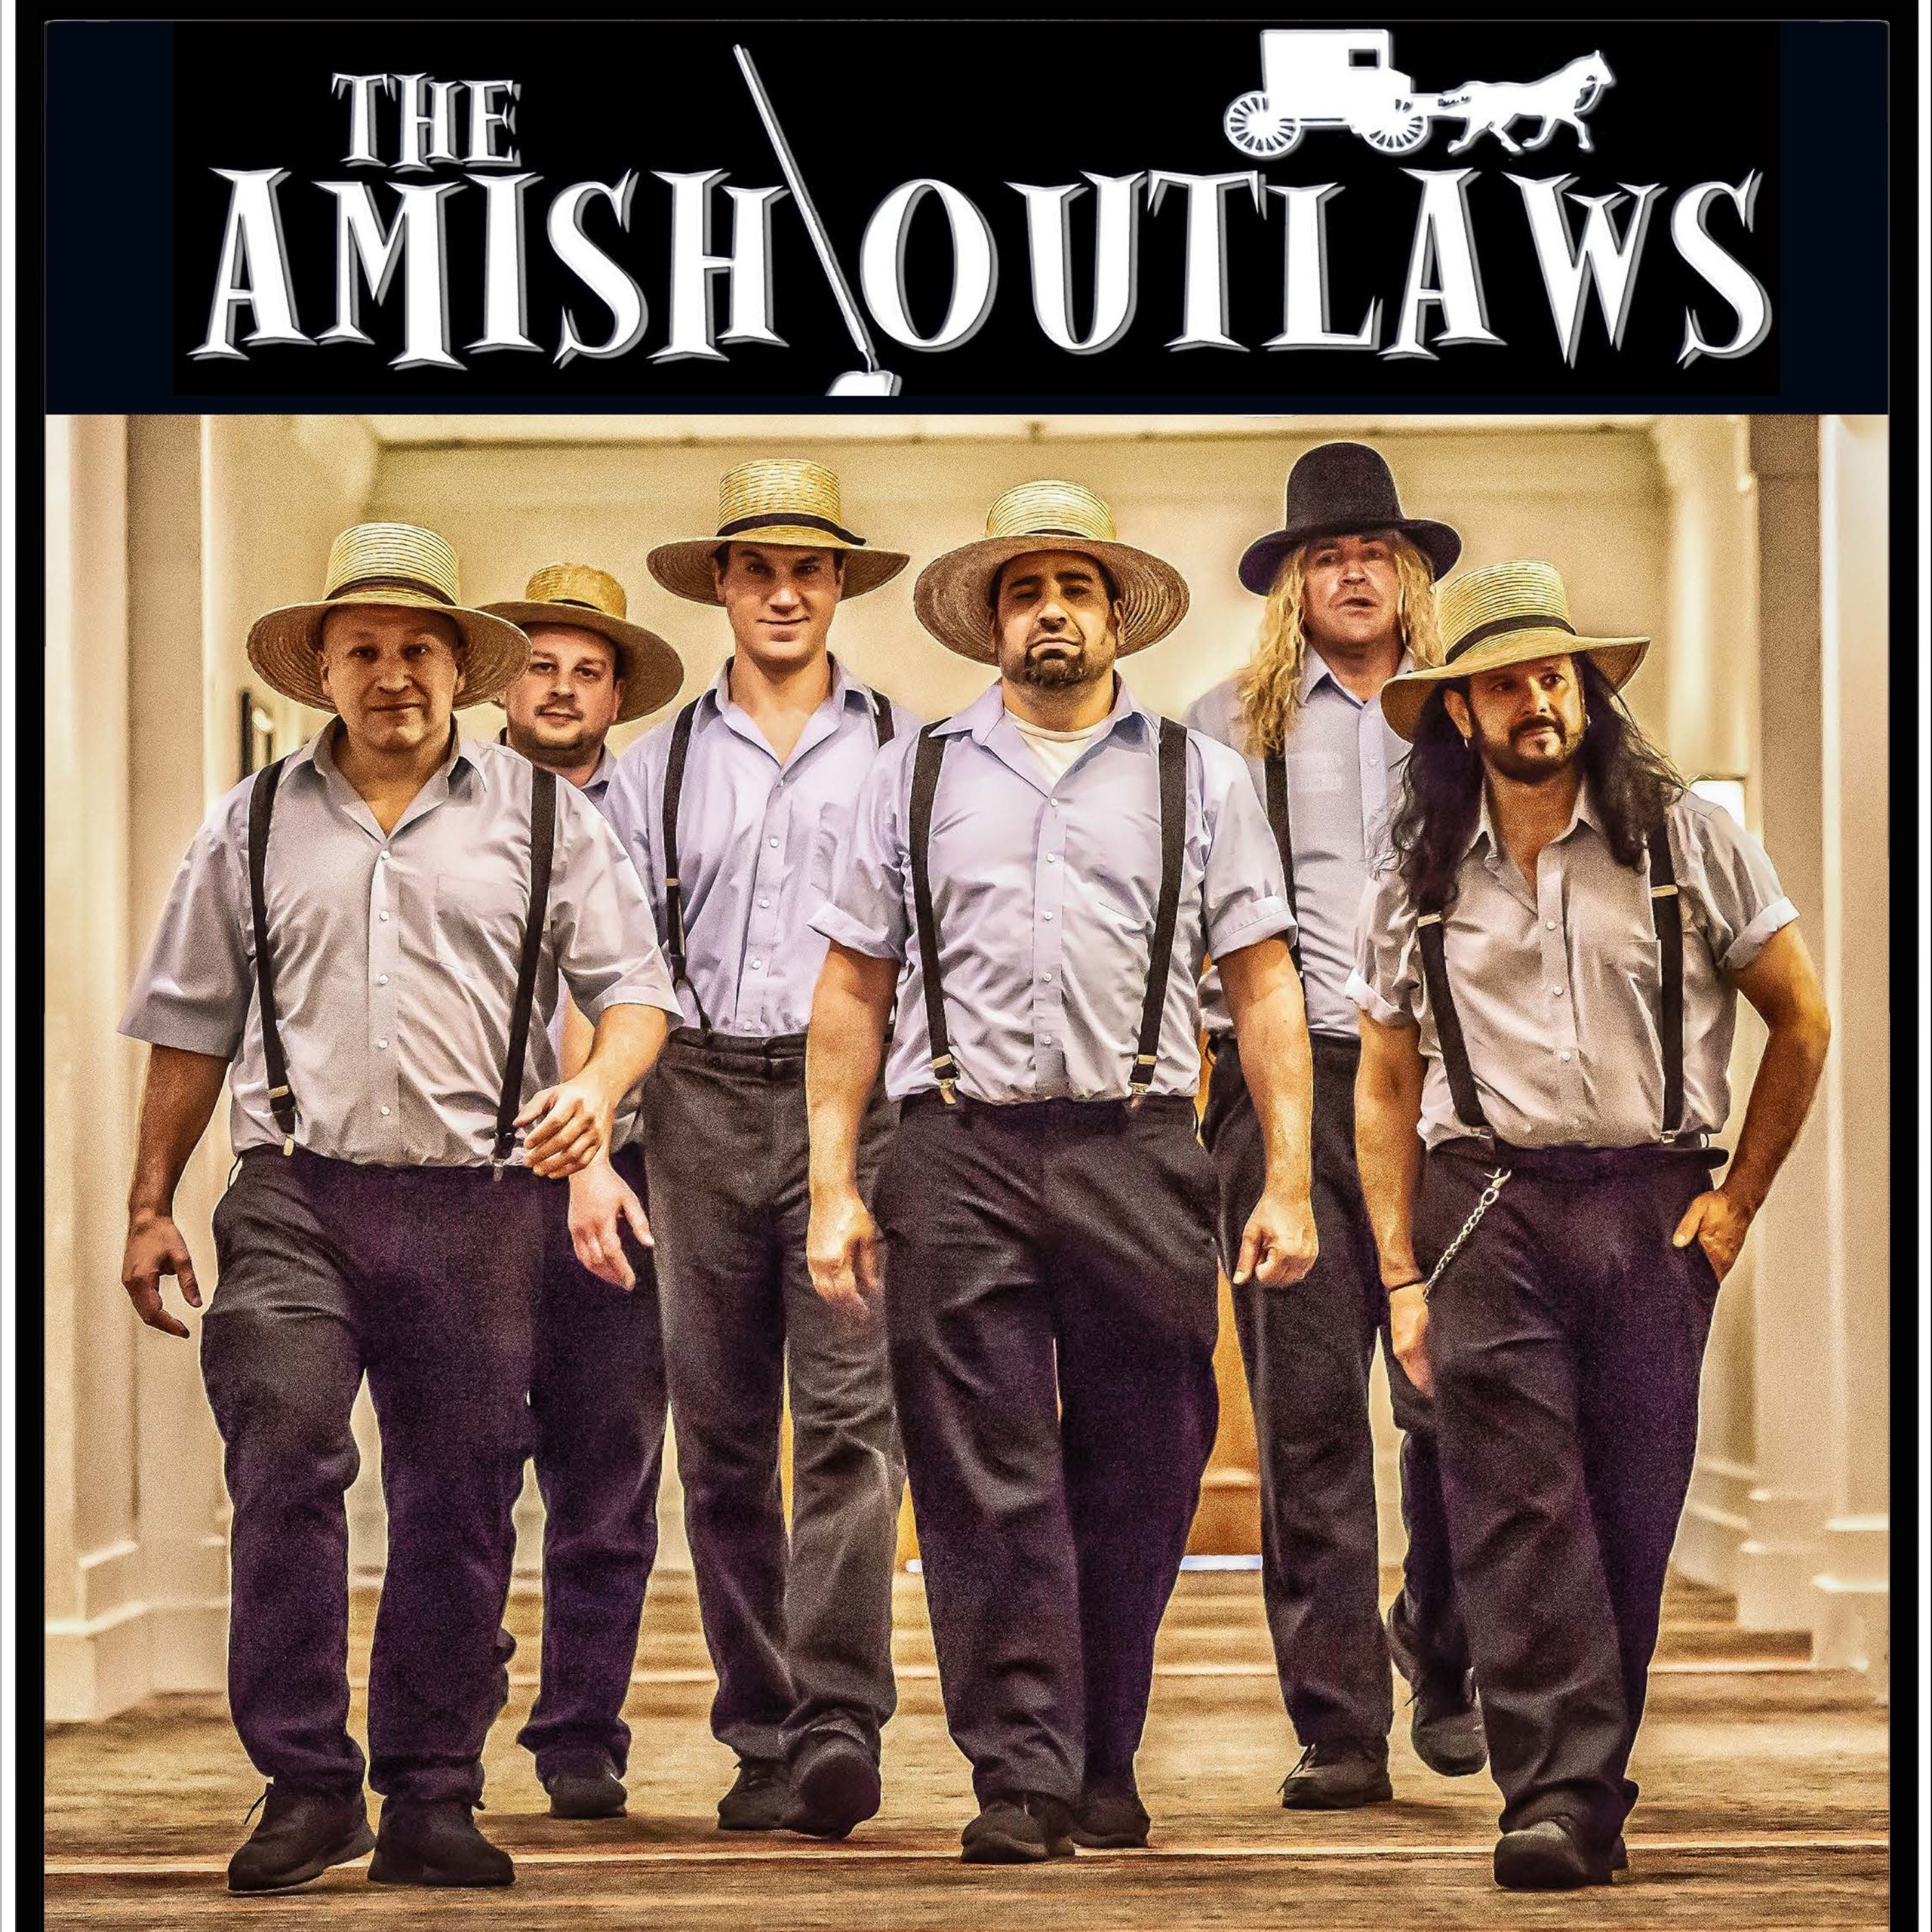 Amish Outlaws Wedding Price How do you Price a Switches?